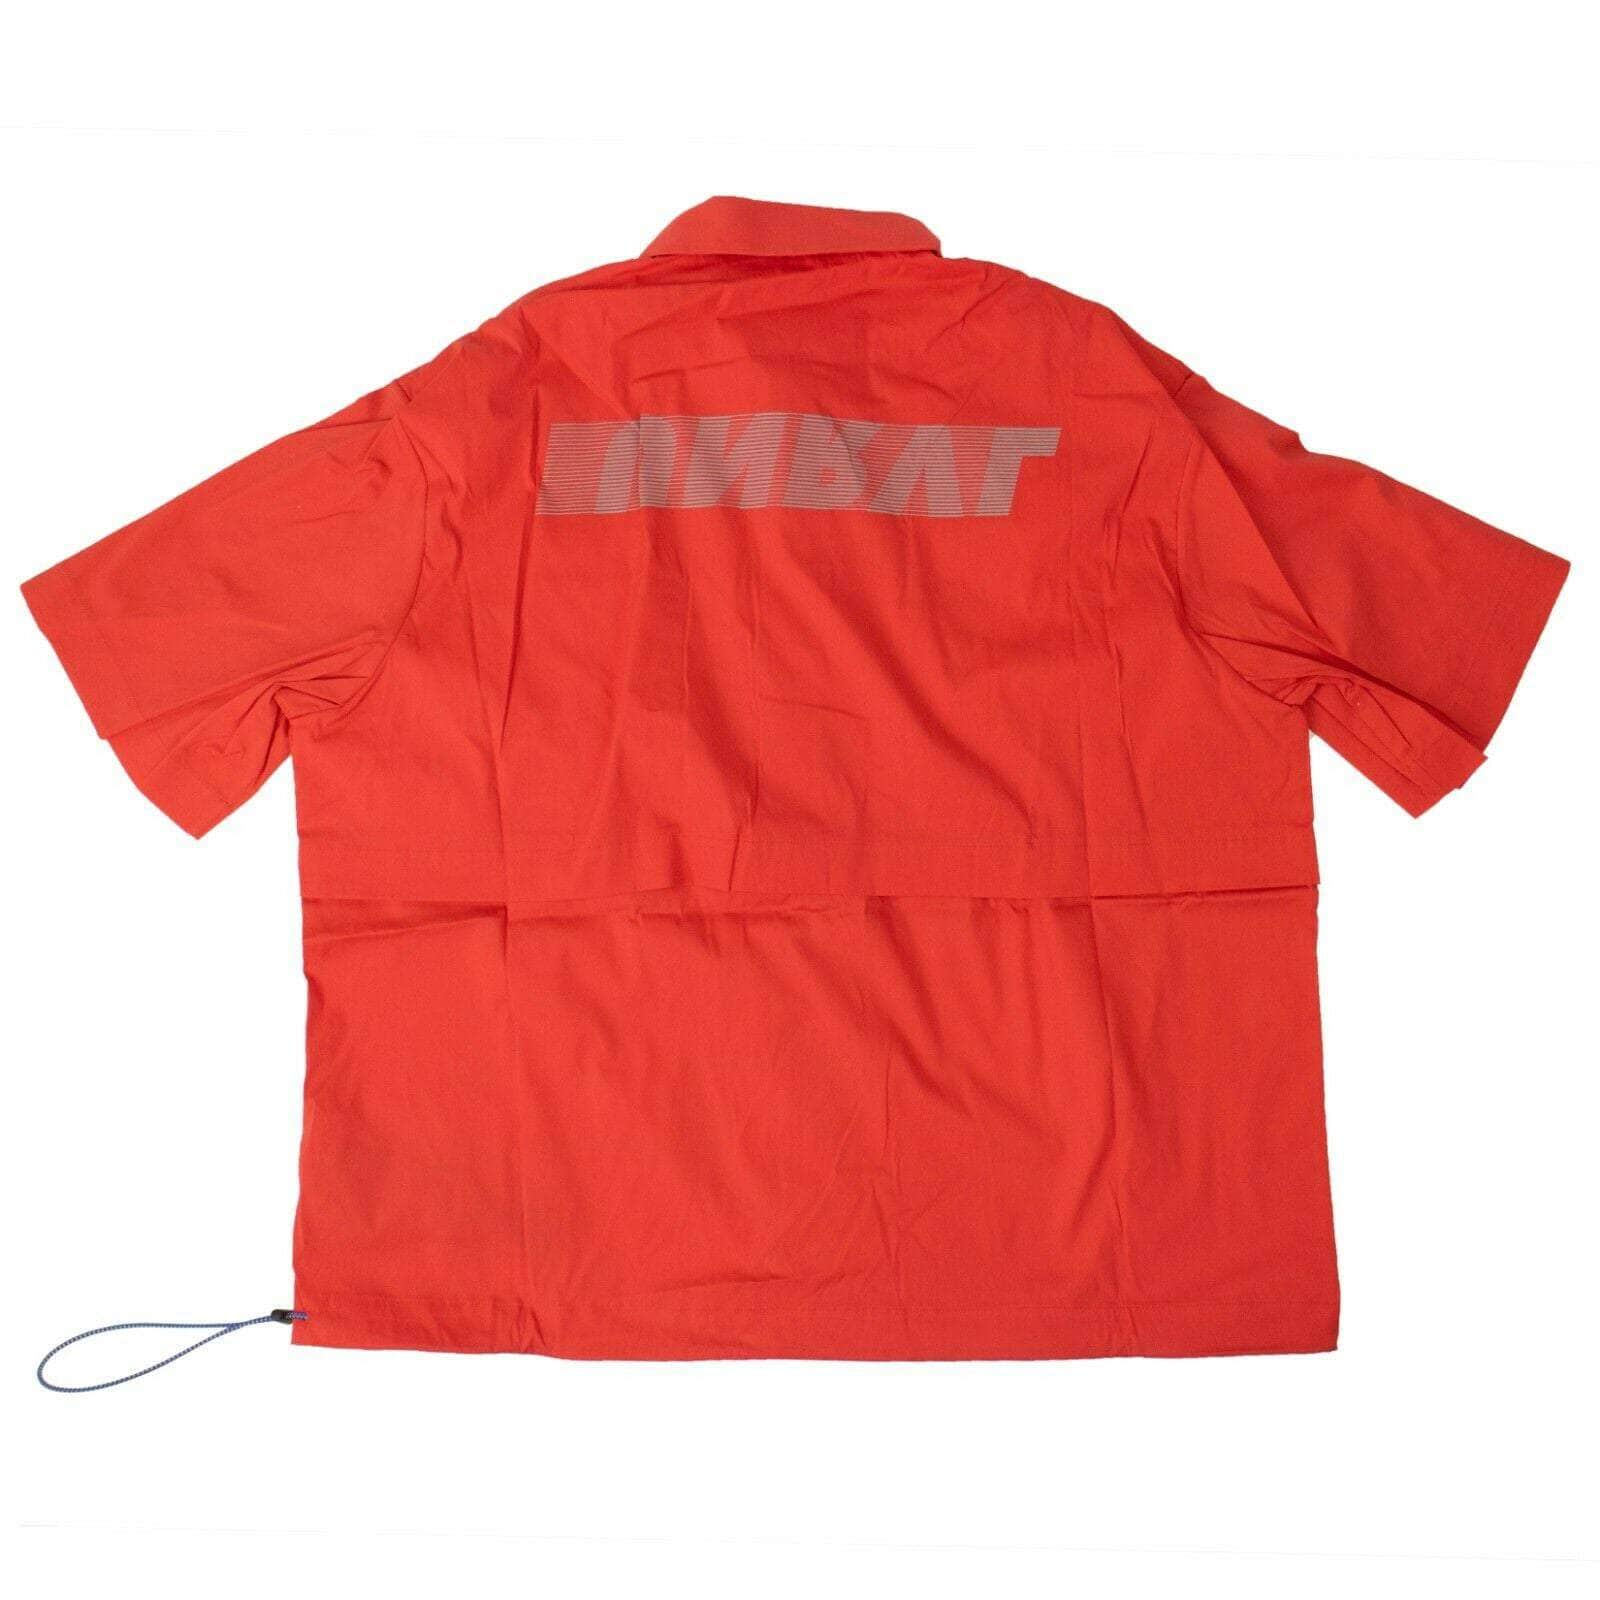 Unravel Project channelenable-all, chicmi, couponcollection, gender-mens, main-clothing, size-l, size-m, size-s, under-250, unravel-project Red Oversized Button Down Shirt